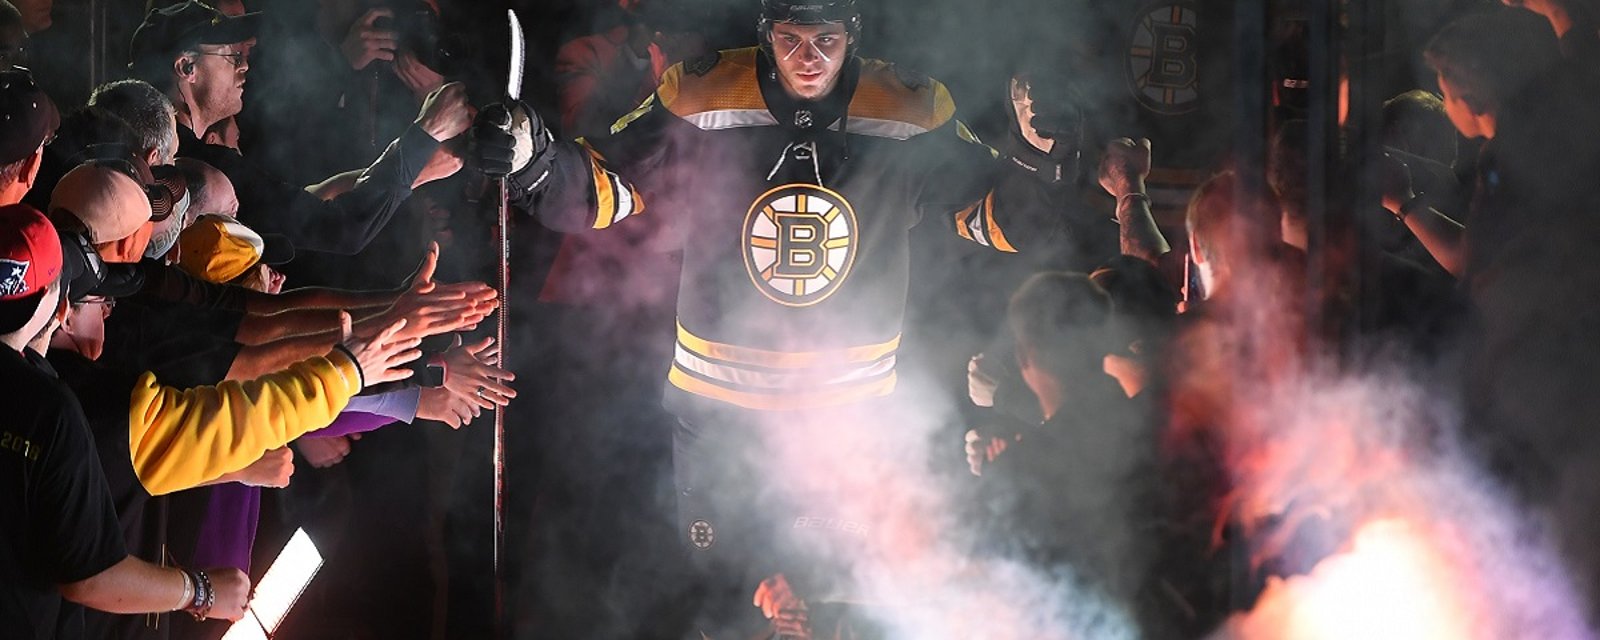 Rumor: Lack of scoring has the Bruins looking to a big trade.